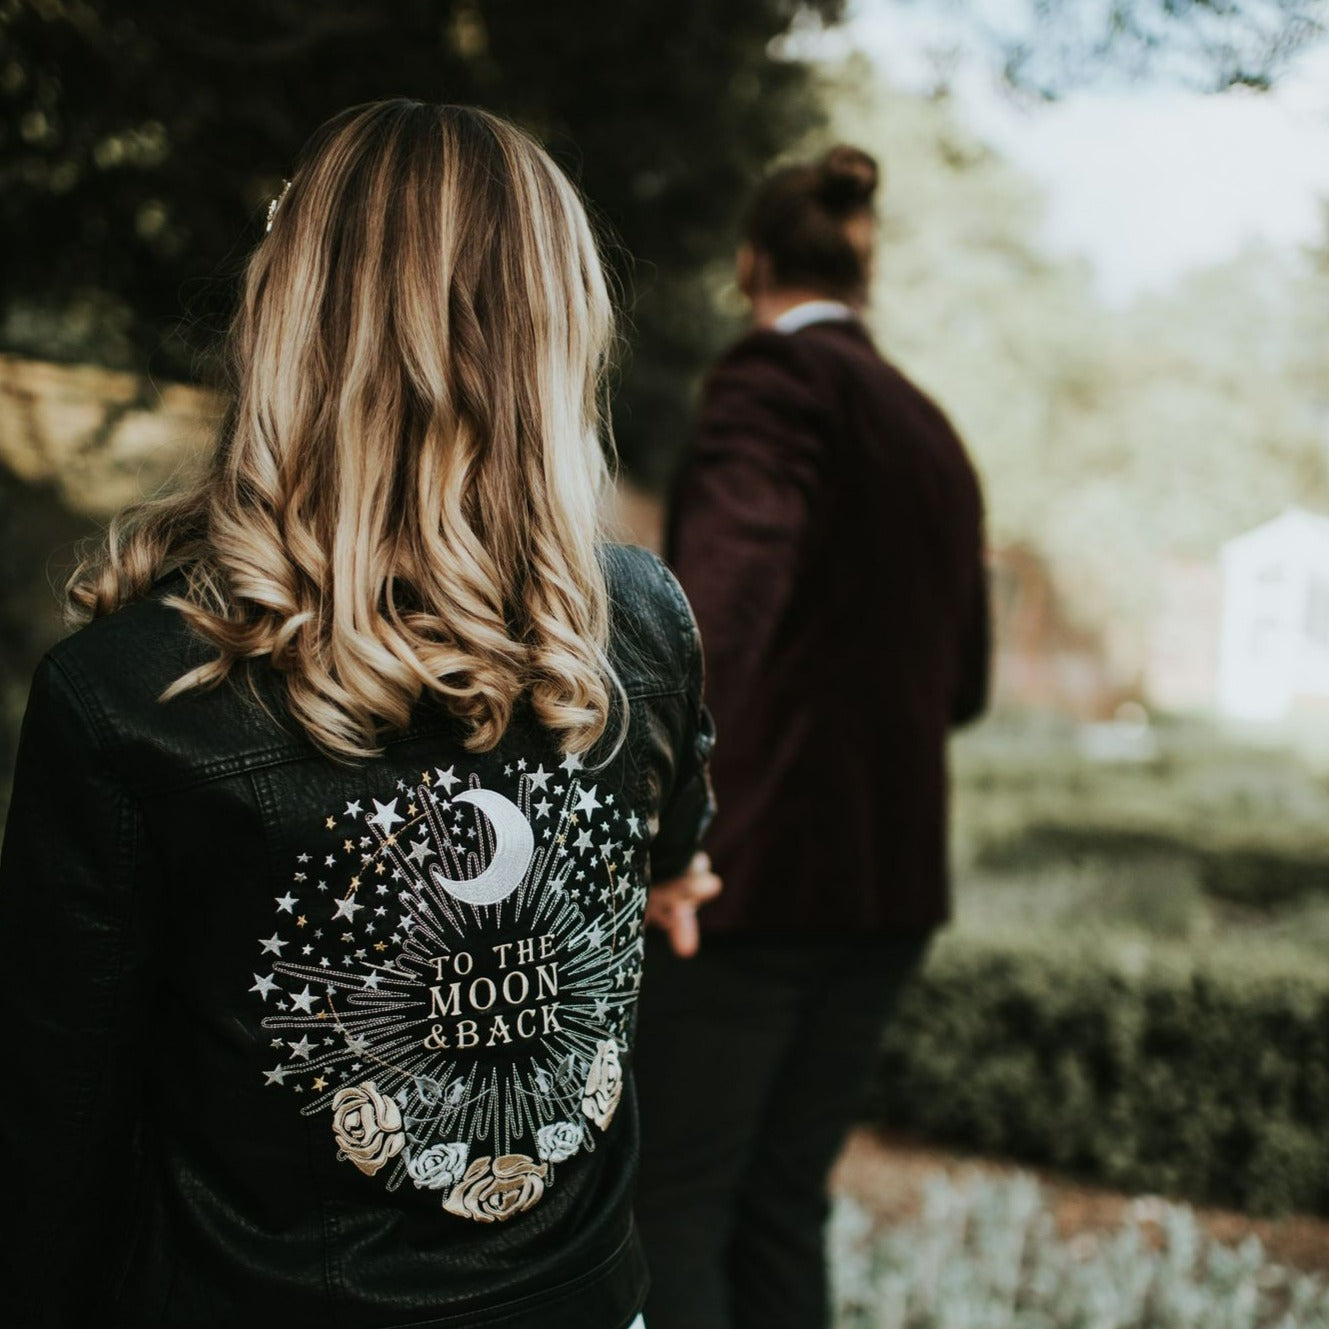 To The Moon & Back Bridal Leather Jacket – a romantic choice for a celestial-themed wedding